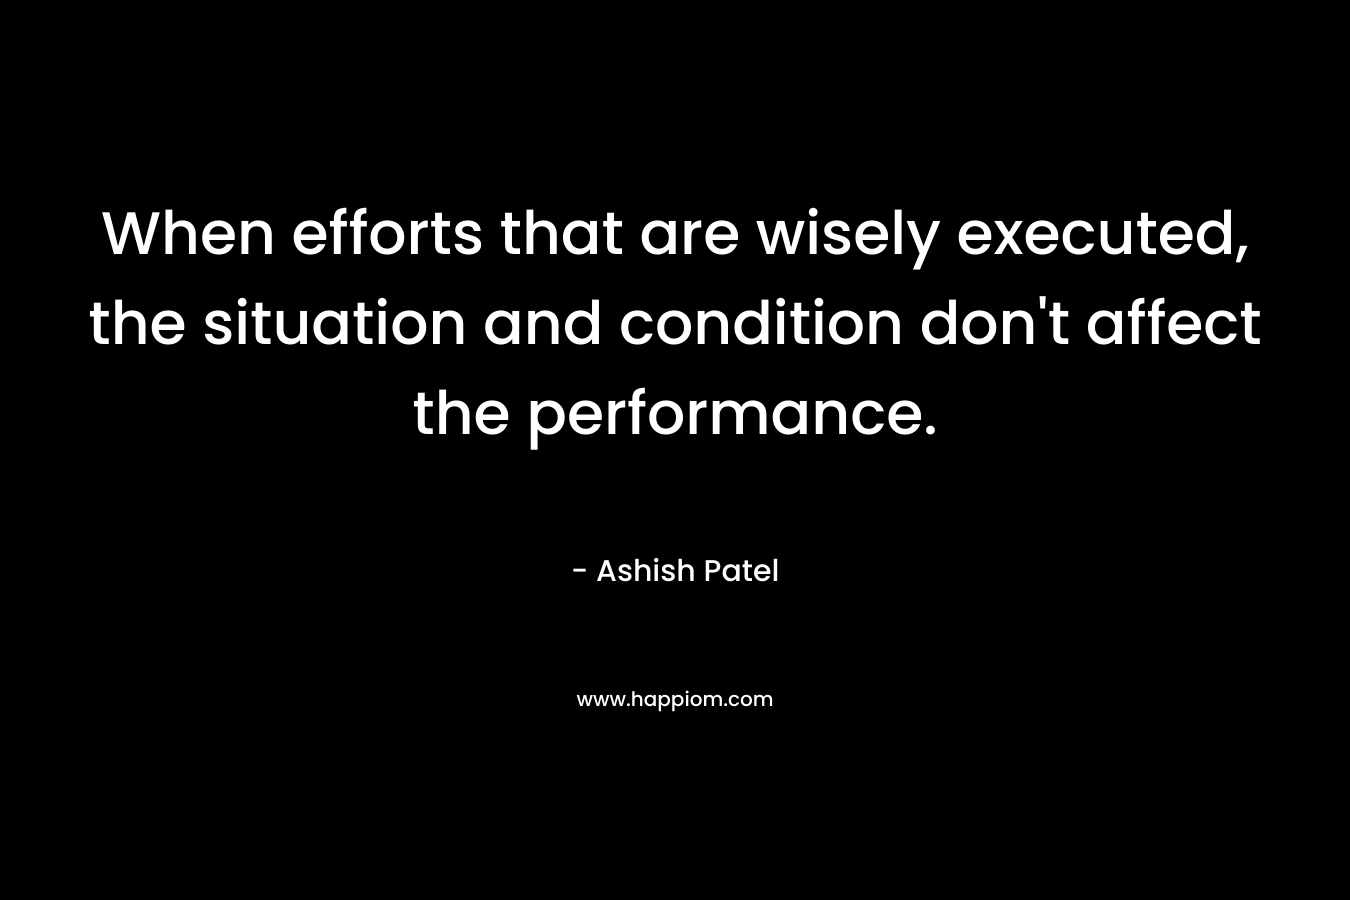 When efforts that are wisely executed, the situation and condition don't affect the performance.